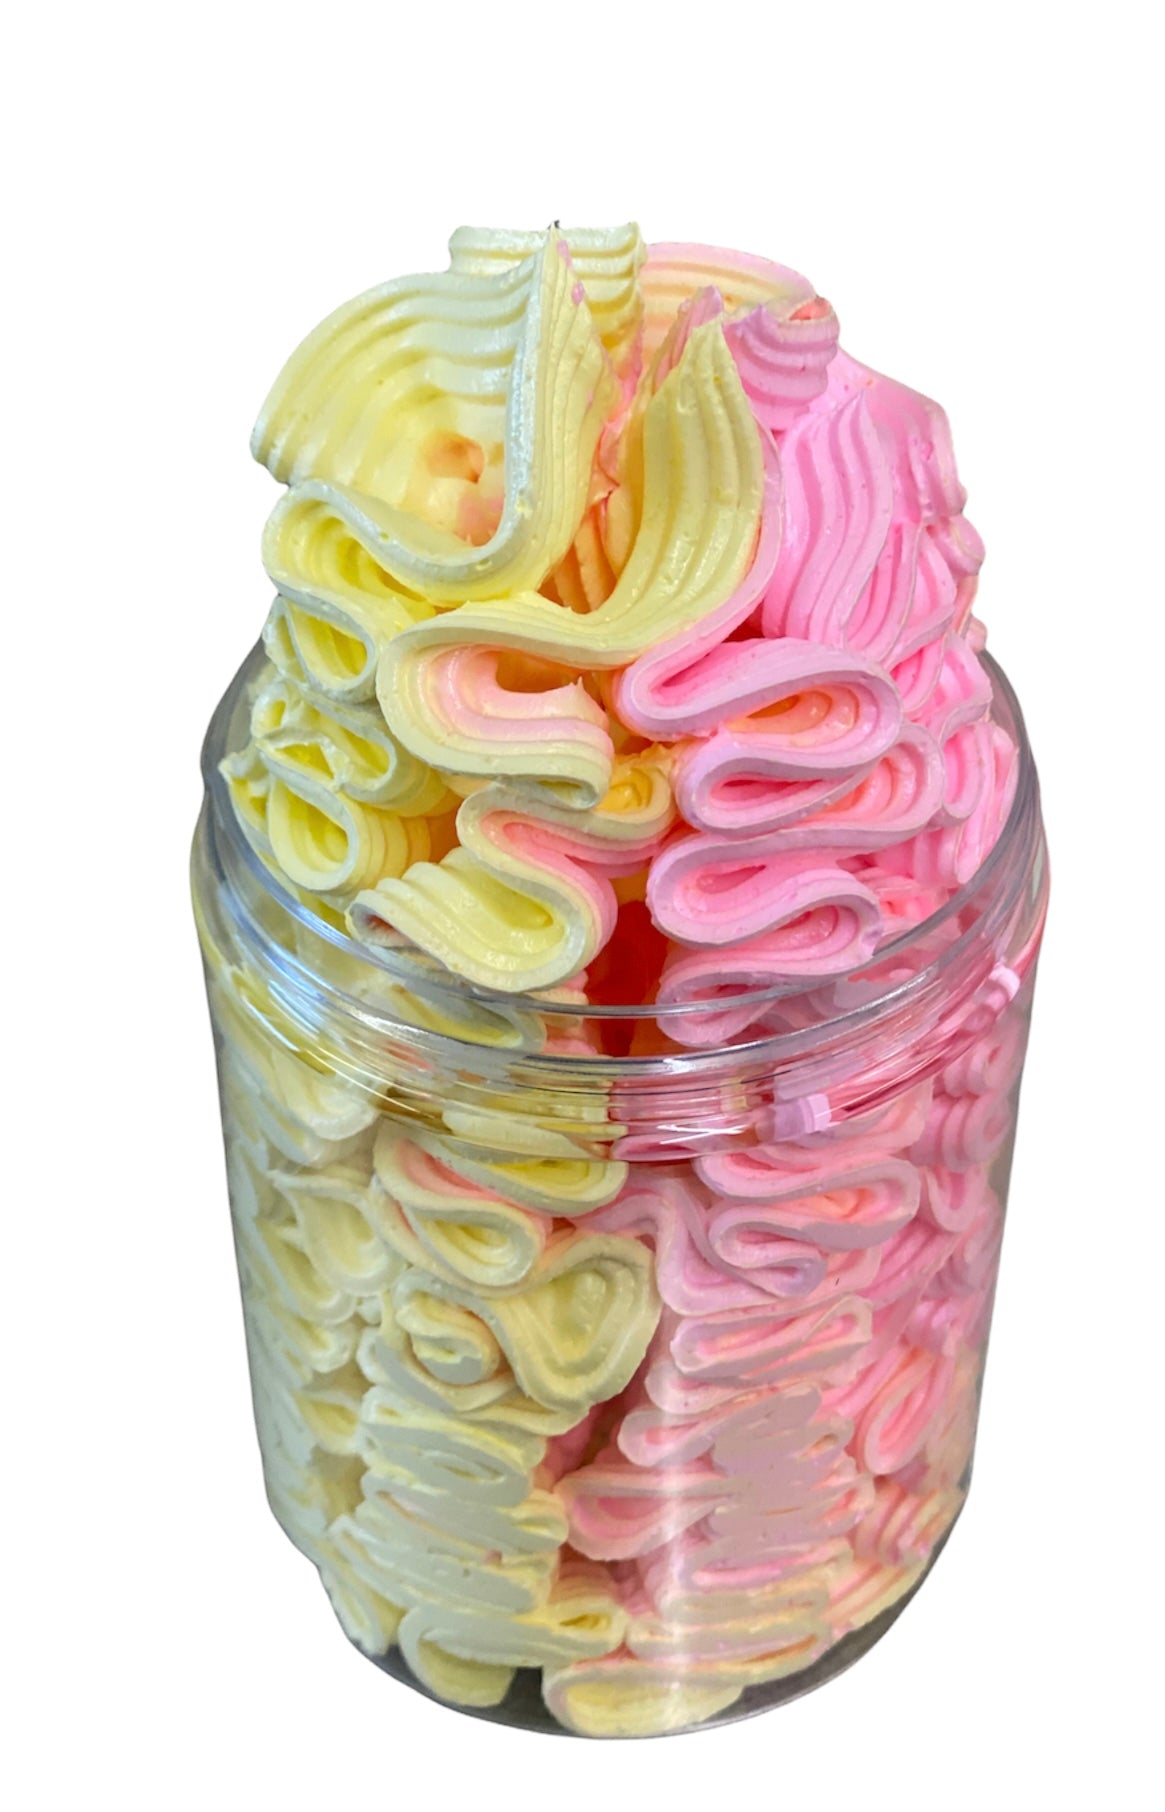 Fruit salad sweets scented whipped soap